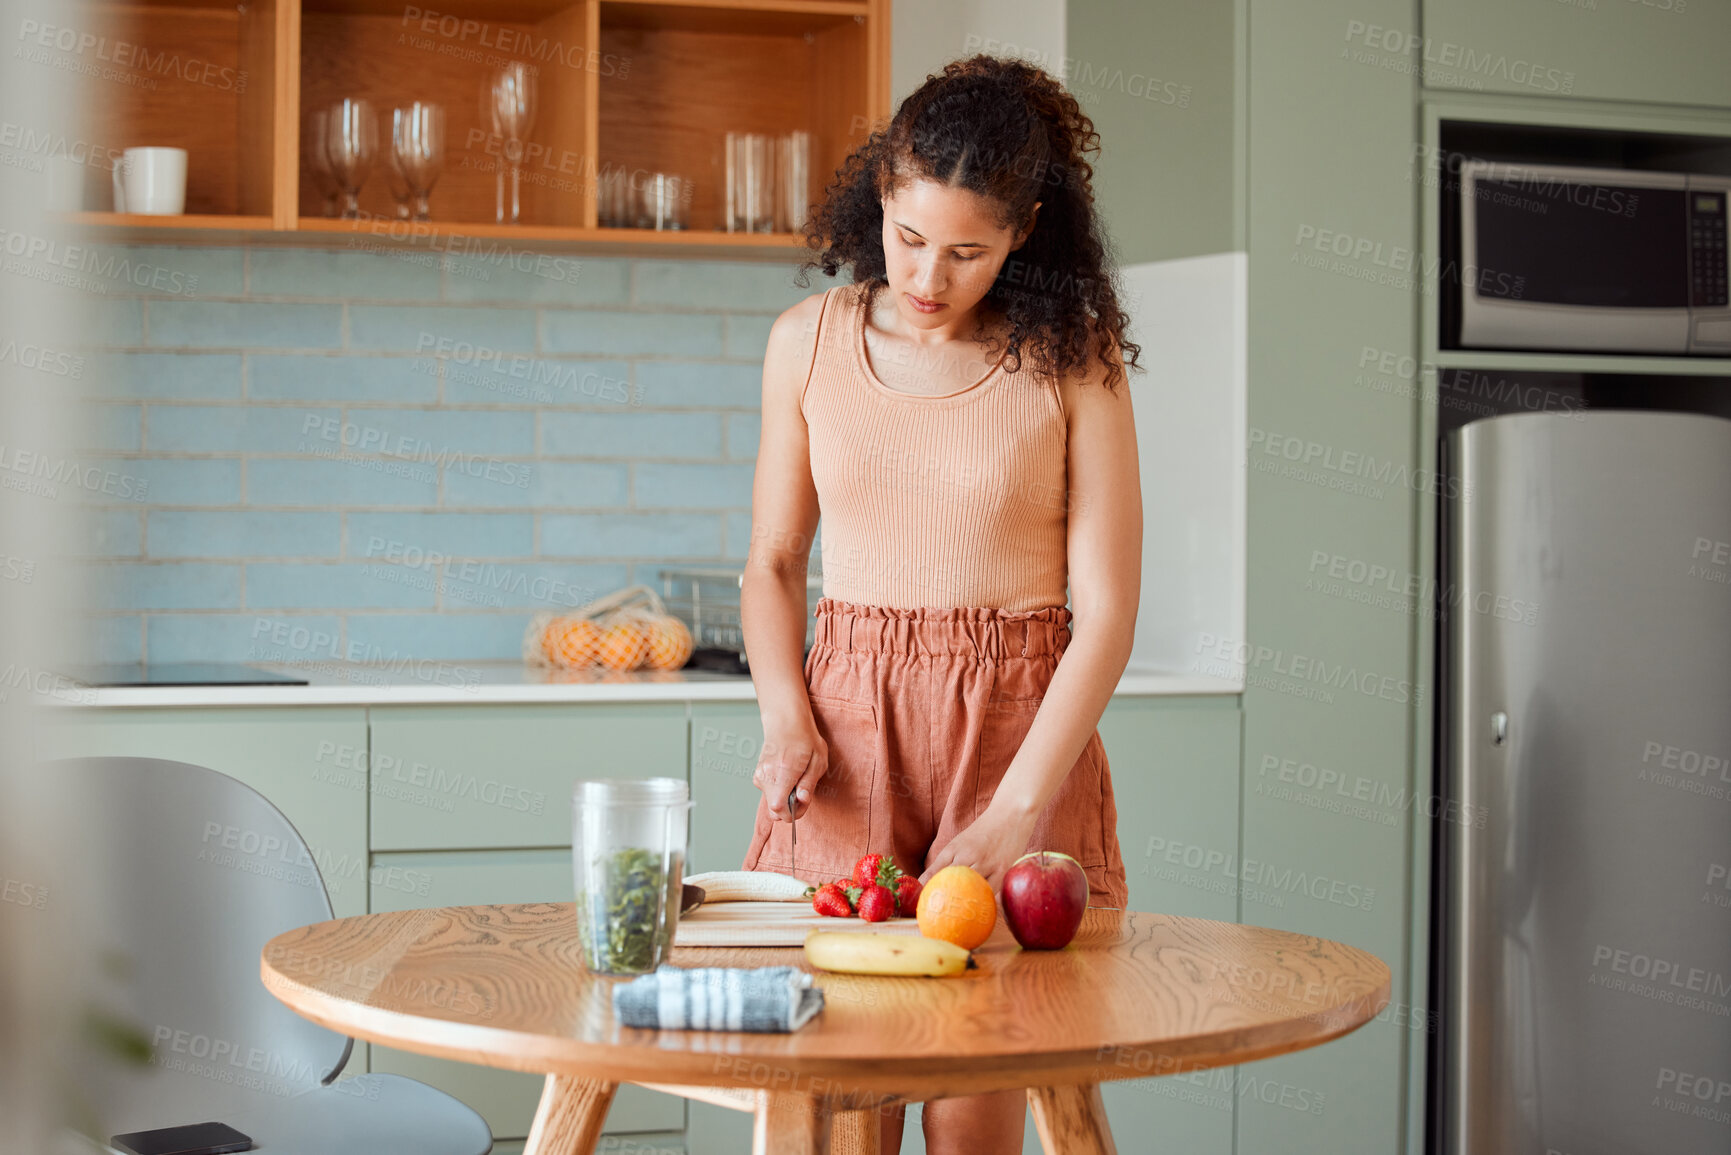 Buy stock photo Healthy, wellness lifestyle and diet meal plan preparations or woman making breakfast fruit salad or smoothie on home  kitchen table. Female preparing organic vegan food, cutting fresh ingredients.